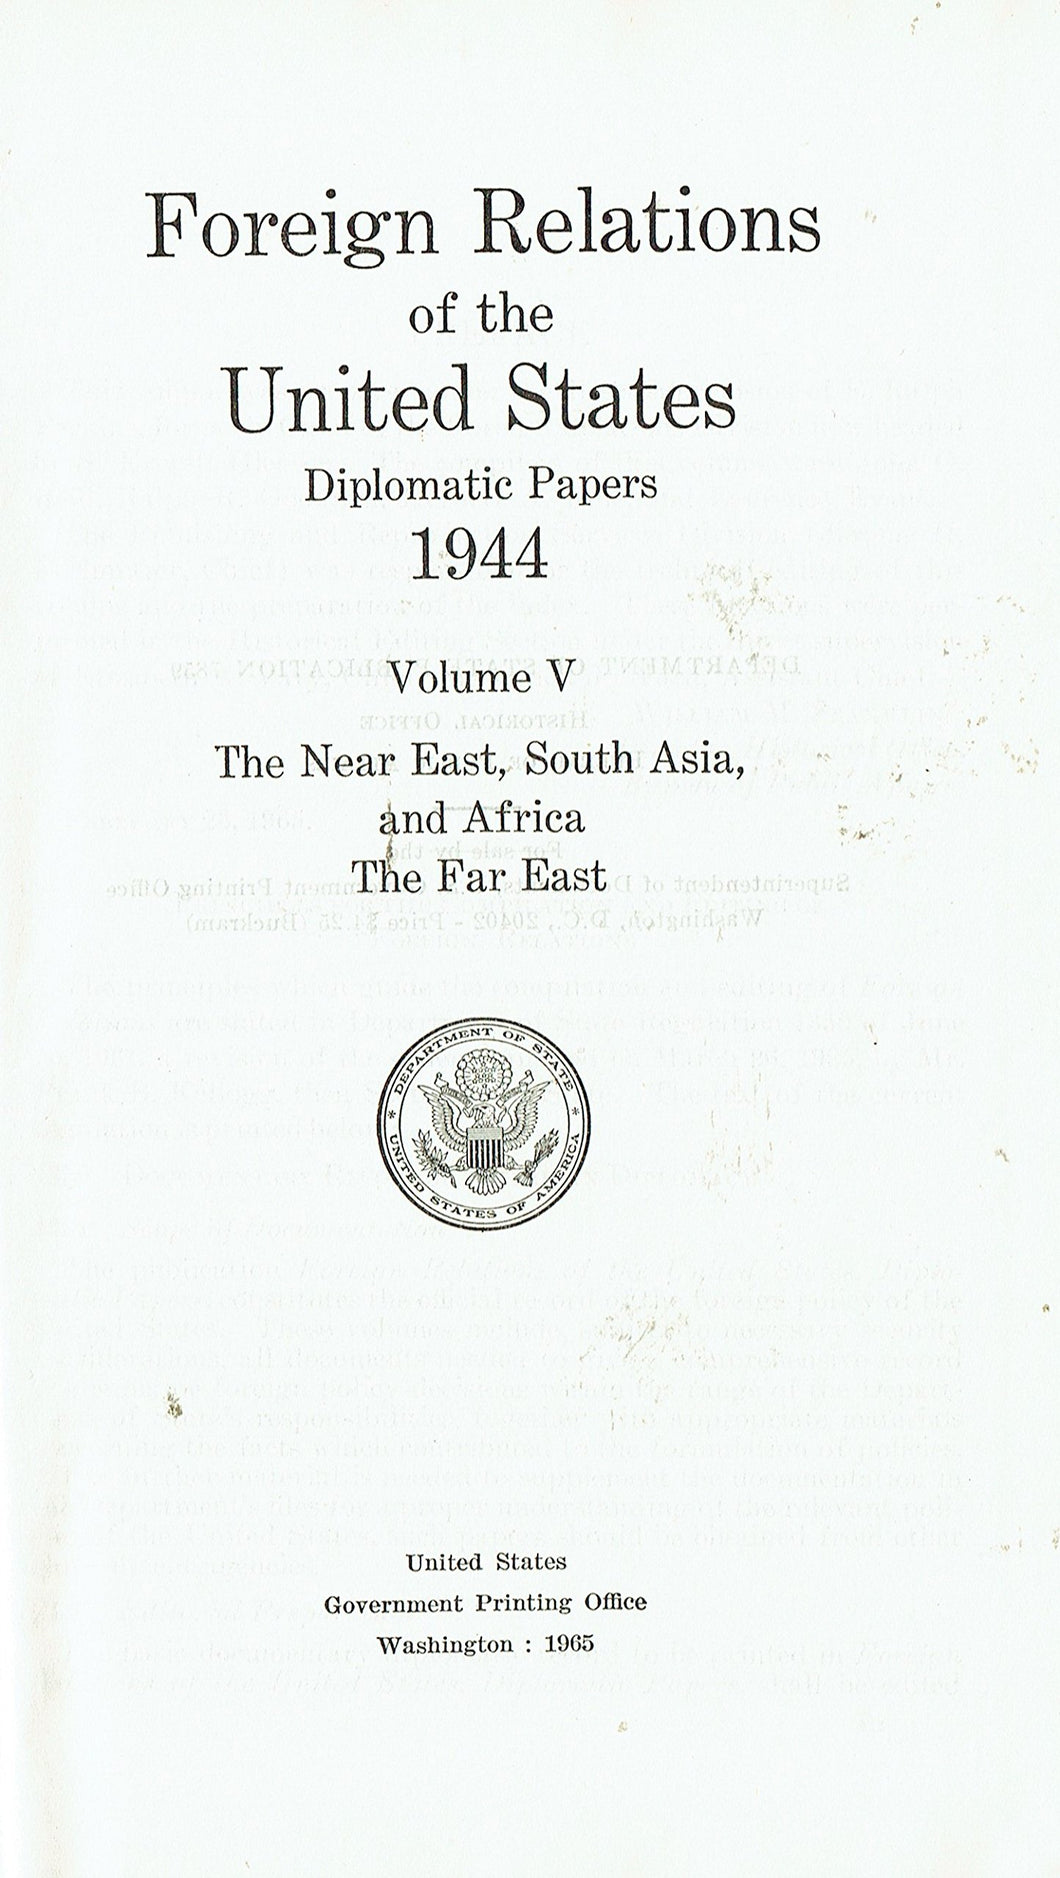 Foreign Relations of the United States - Diplomatic Papers 1944. Volume V: The Near East, South Asia, and Africa, The Far East